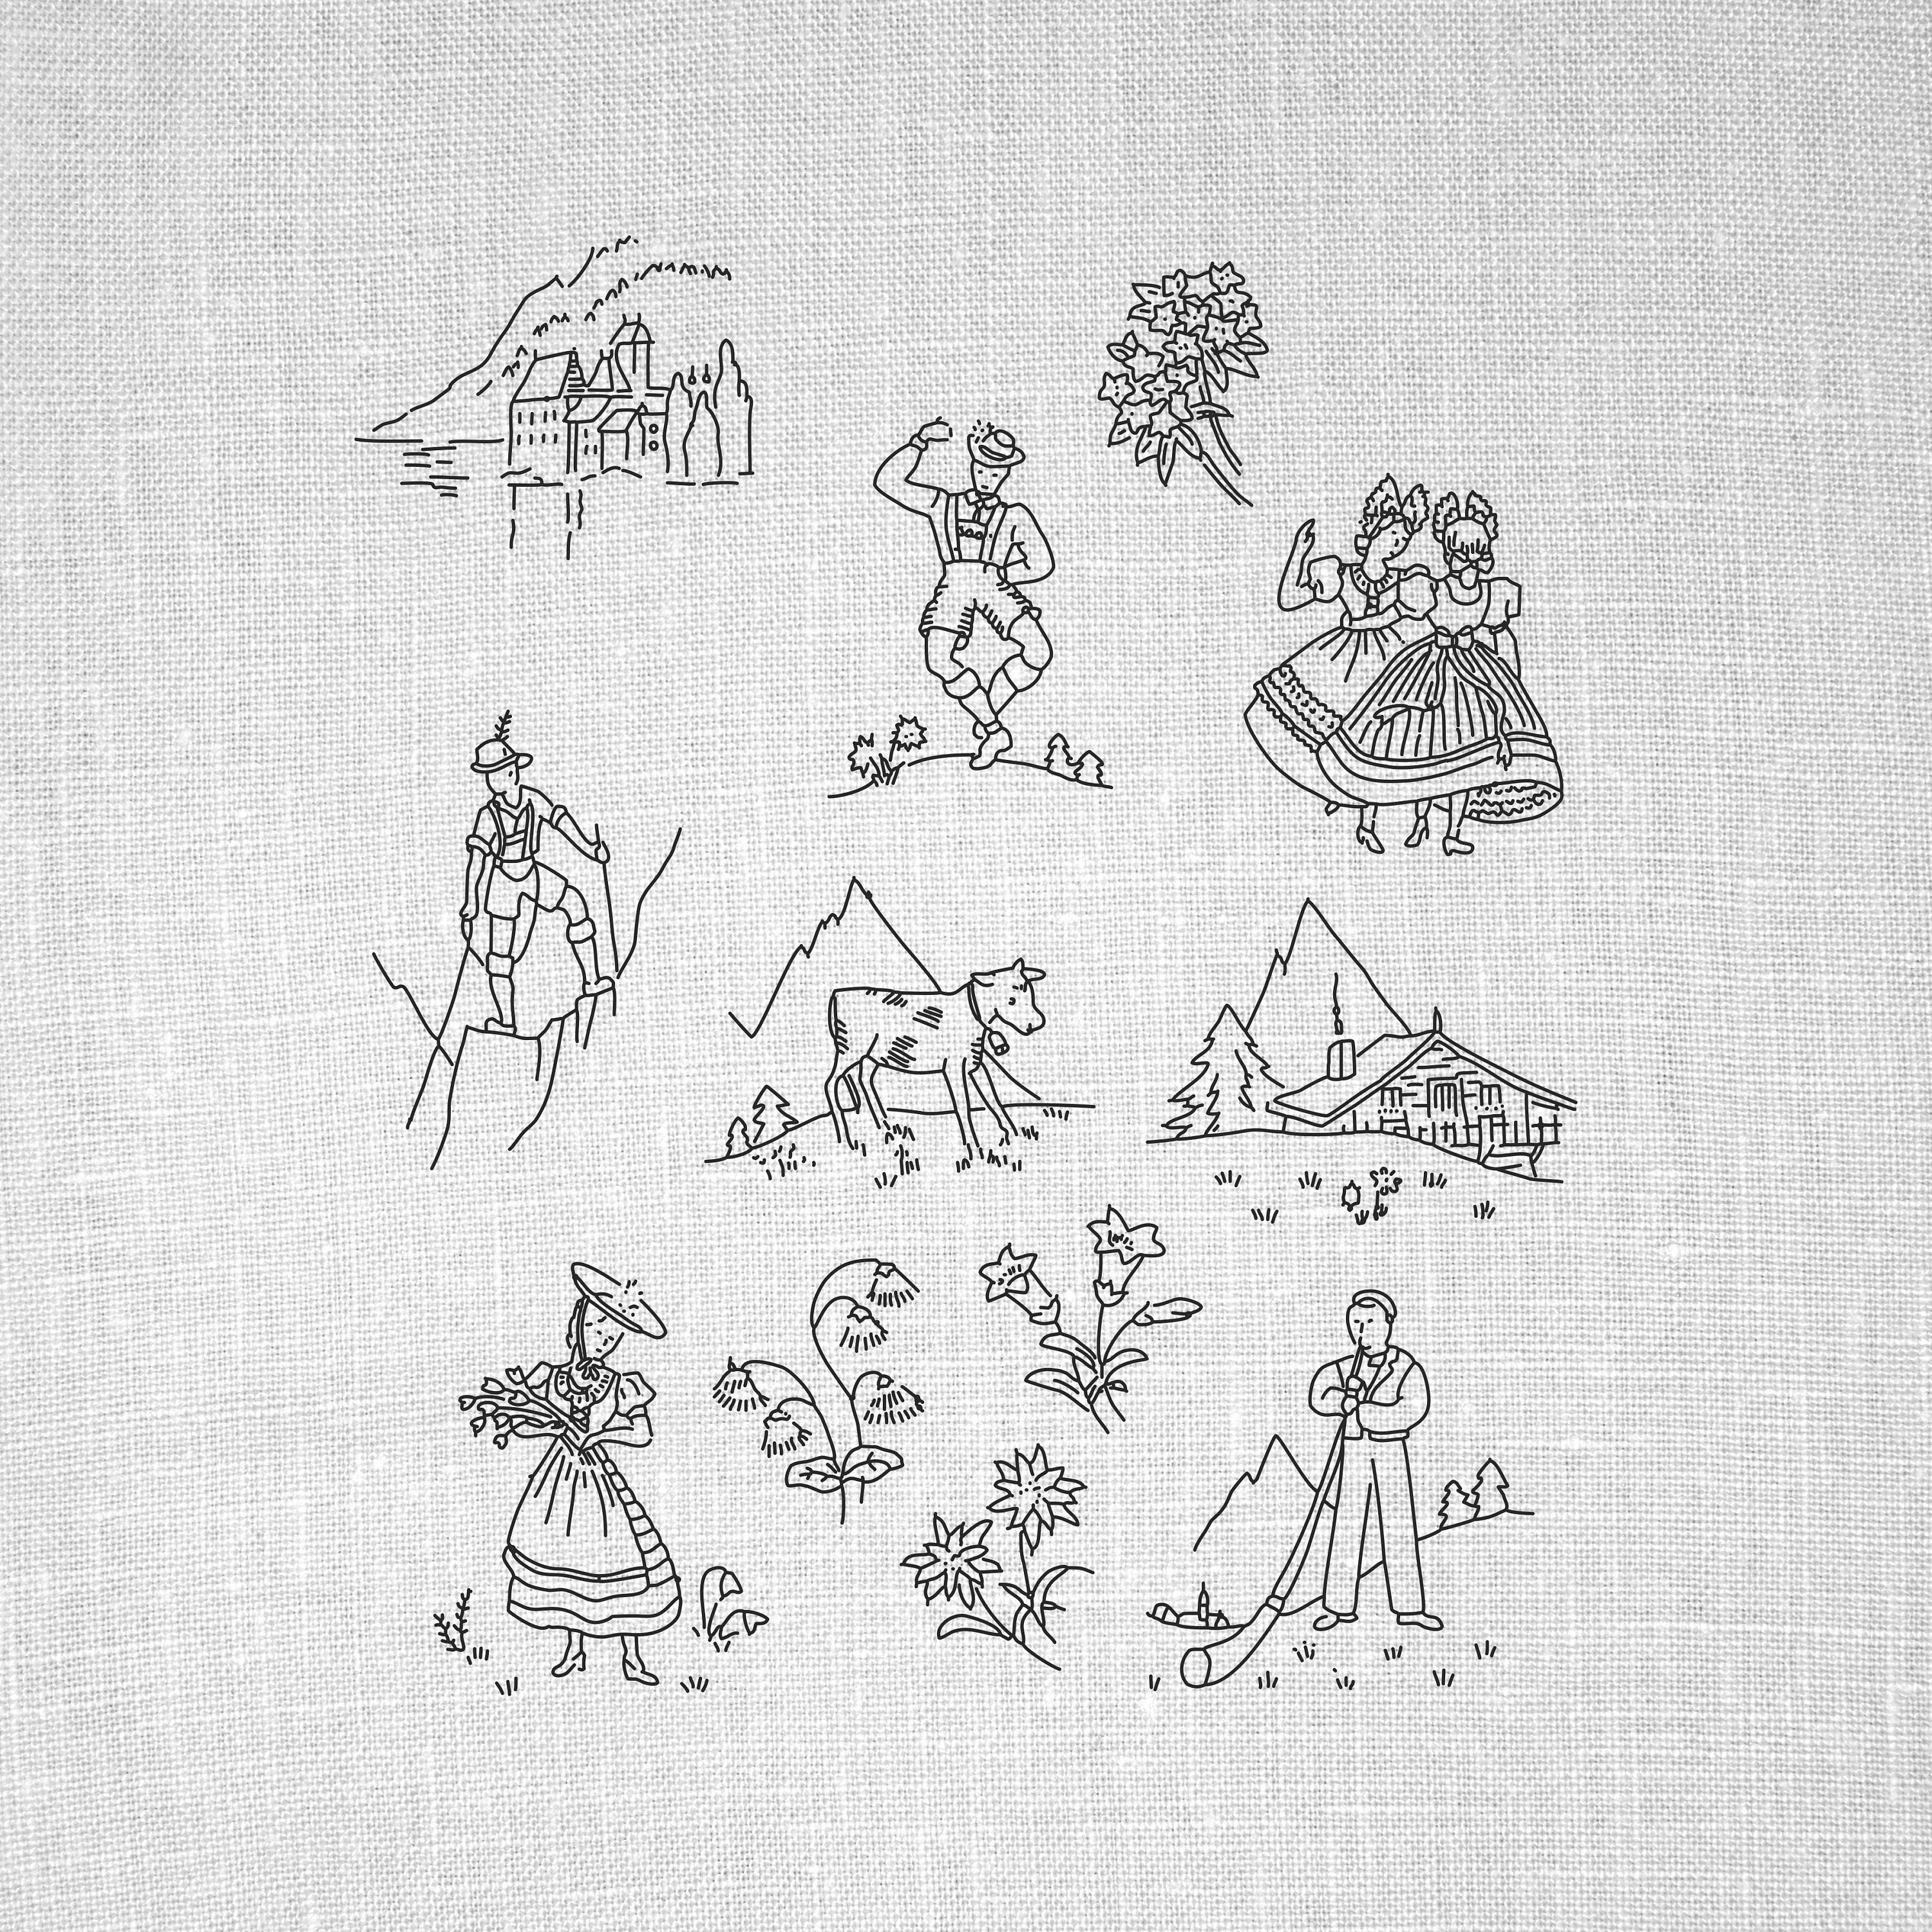 Vintage Hand Embroidery Patterns Miniature Alpine Scenes Hand Embroidery Patterns Vintage Pdf Pattern Alps Embroidery Printable Embroidery Patterns